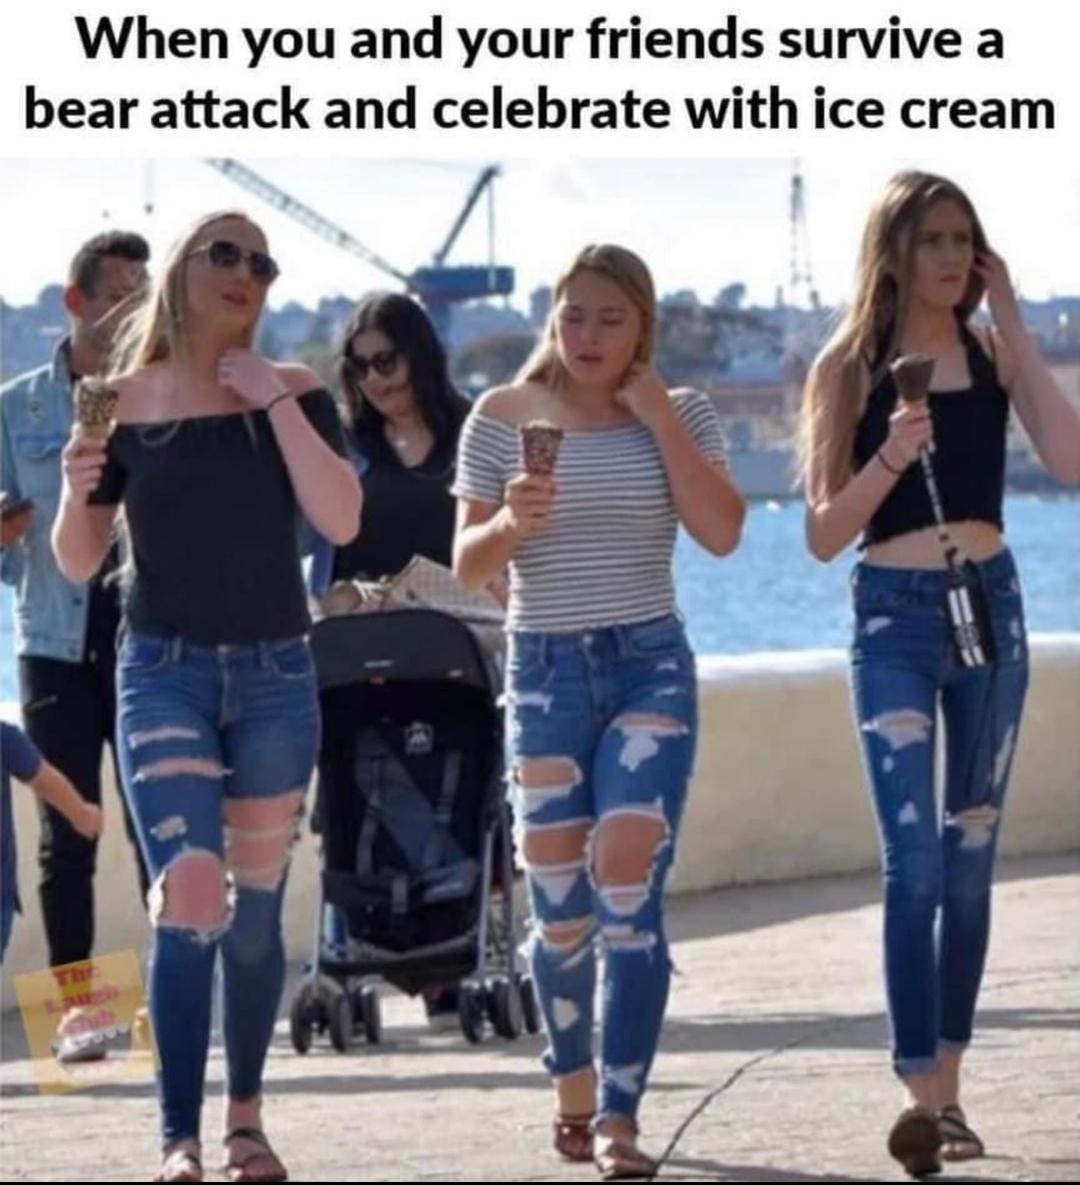 you and your friends survive a bear attack and celebrate with ice cream - When you and your friends survive a bear attack and celebrate with ice cream